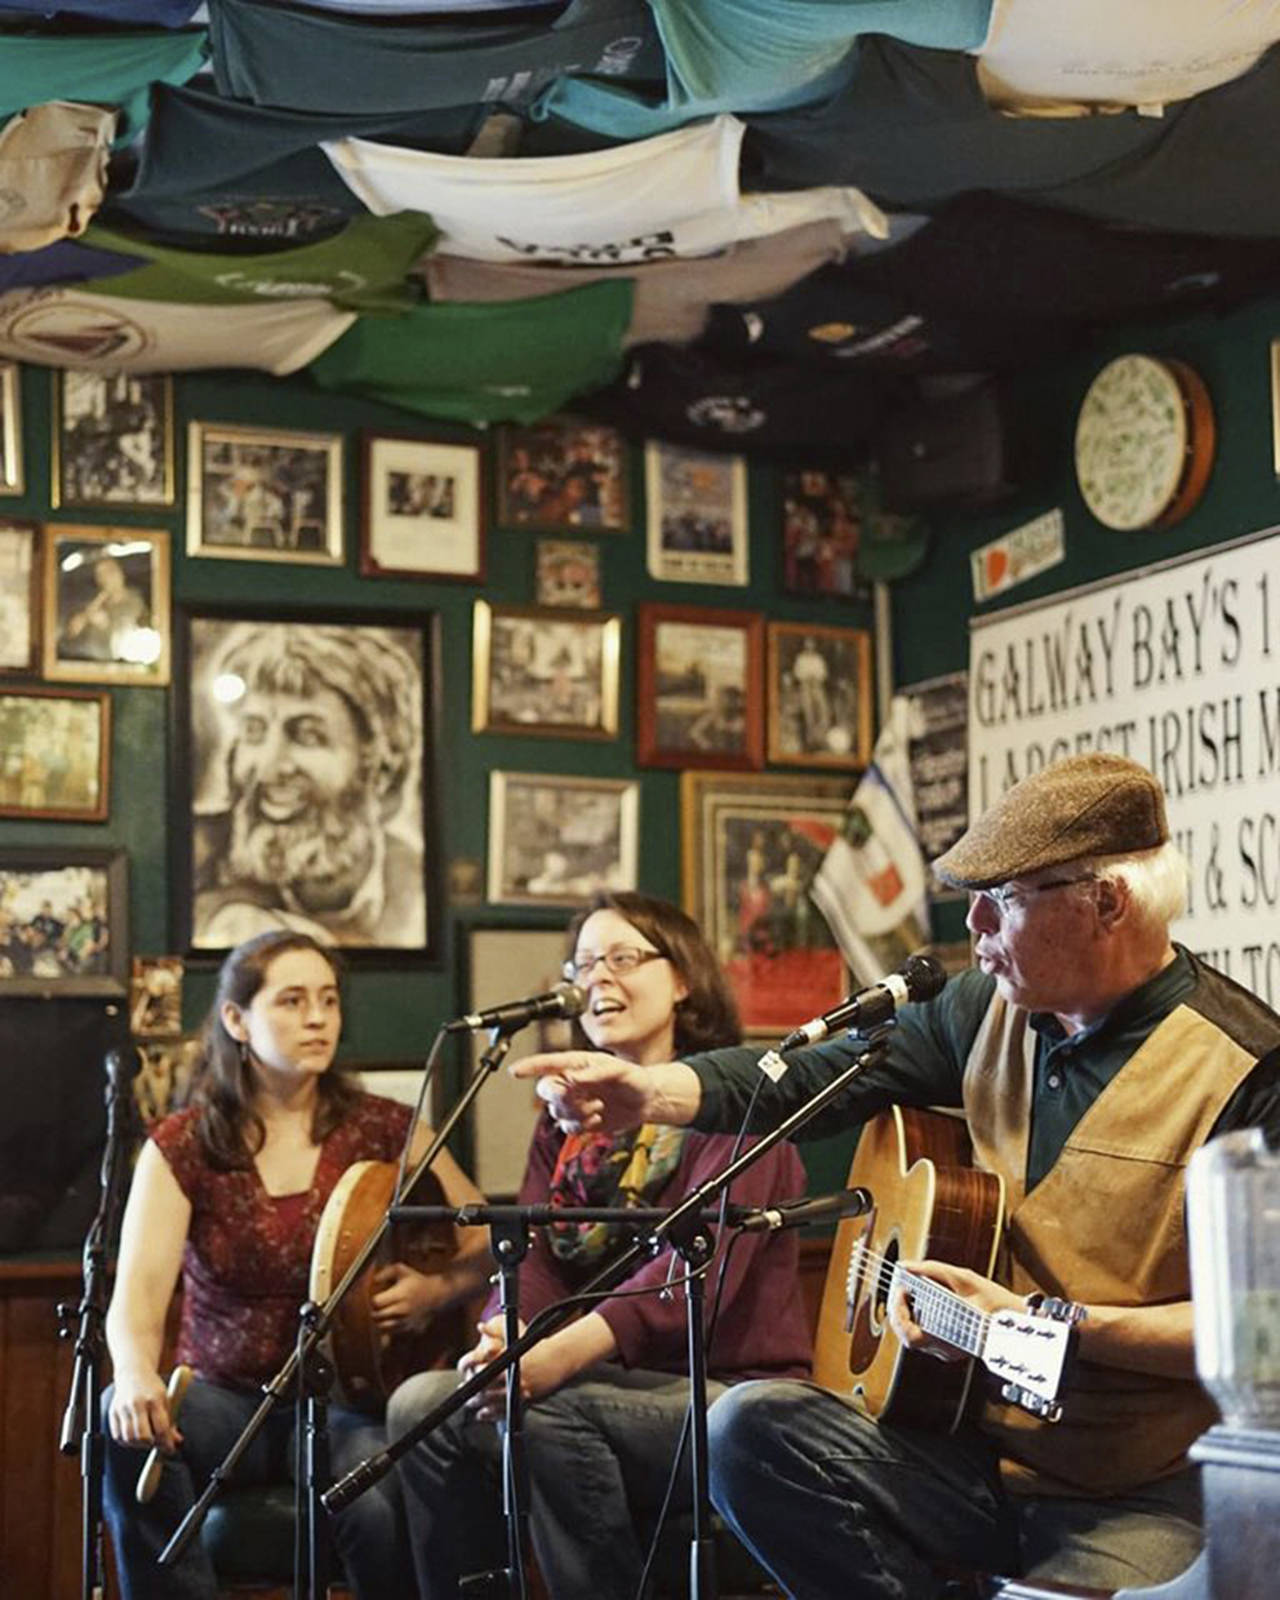 (Courtesy photo) Hank Cramer performs at Galway Bay recently with two sisters from Chehalis: Maggie MacInnis and Jessie Erickson.